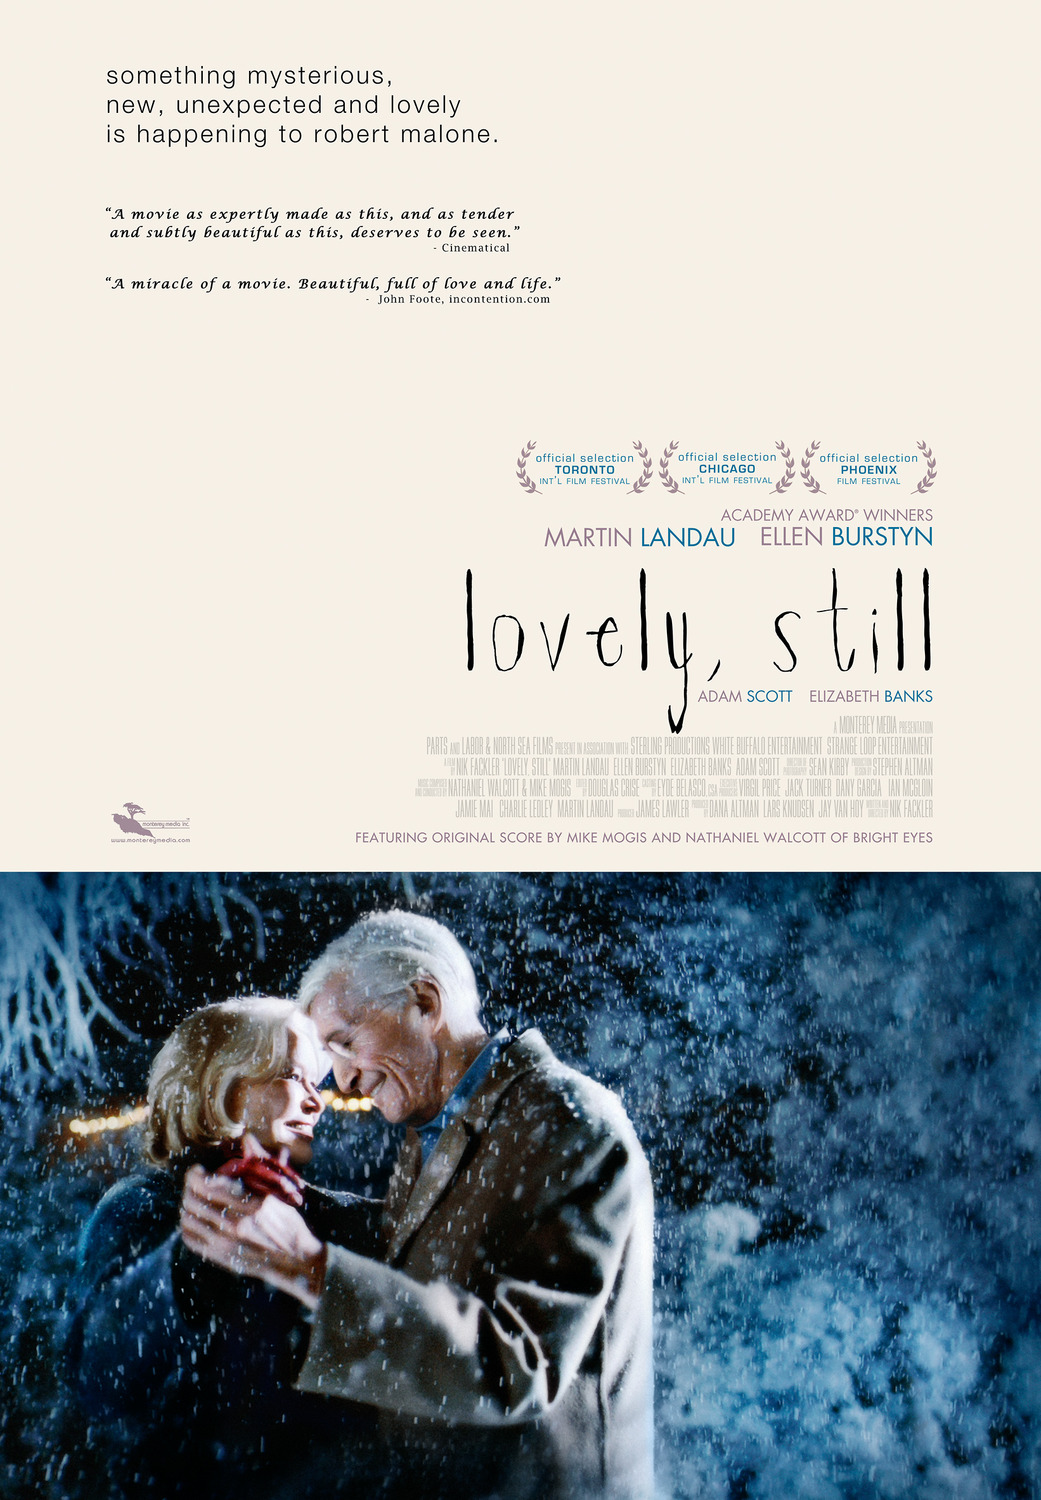 Extra Large Movie Poster Image for Lovely, Still 